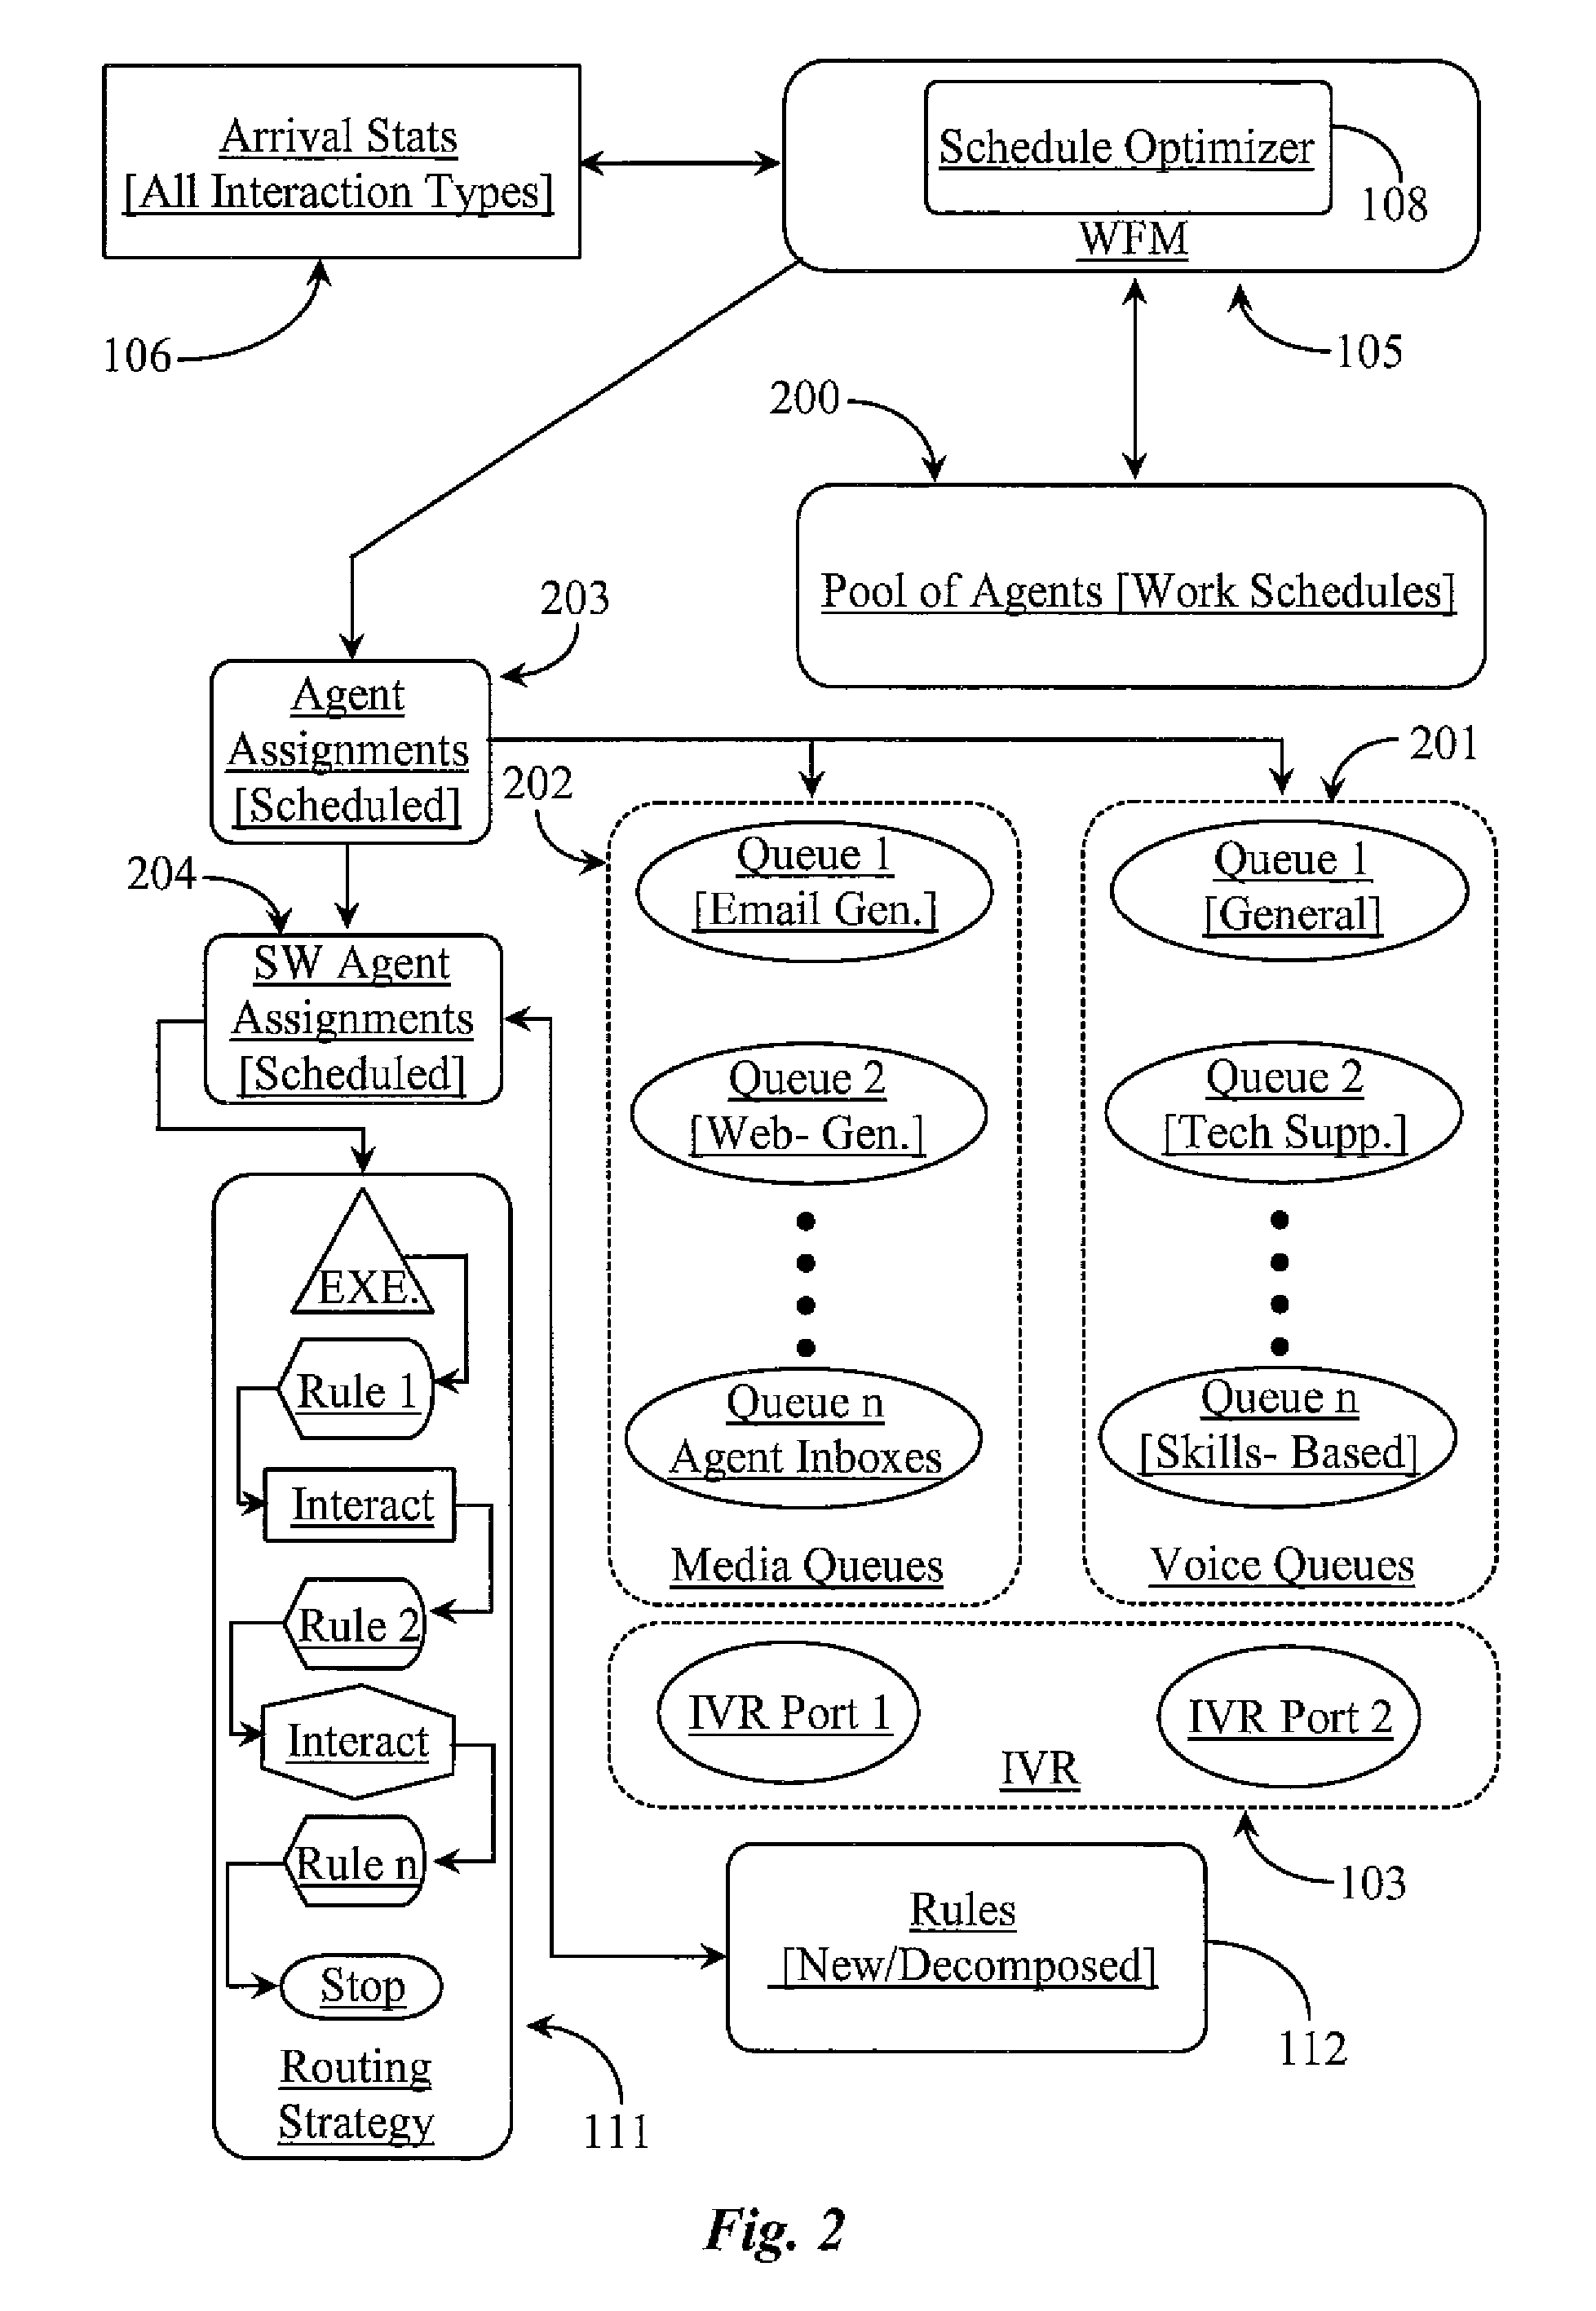 System for scheduling routing rules in a contact center based on forcasted and actual interaction load and staffing requirements